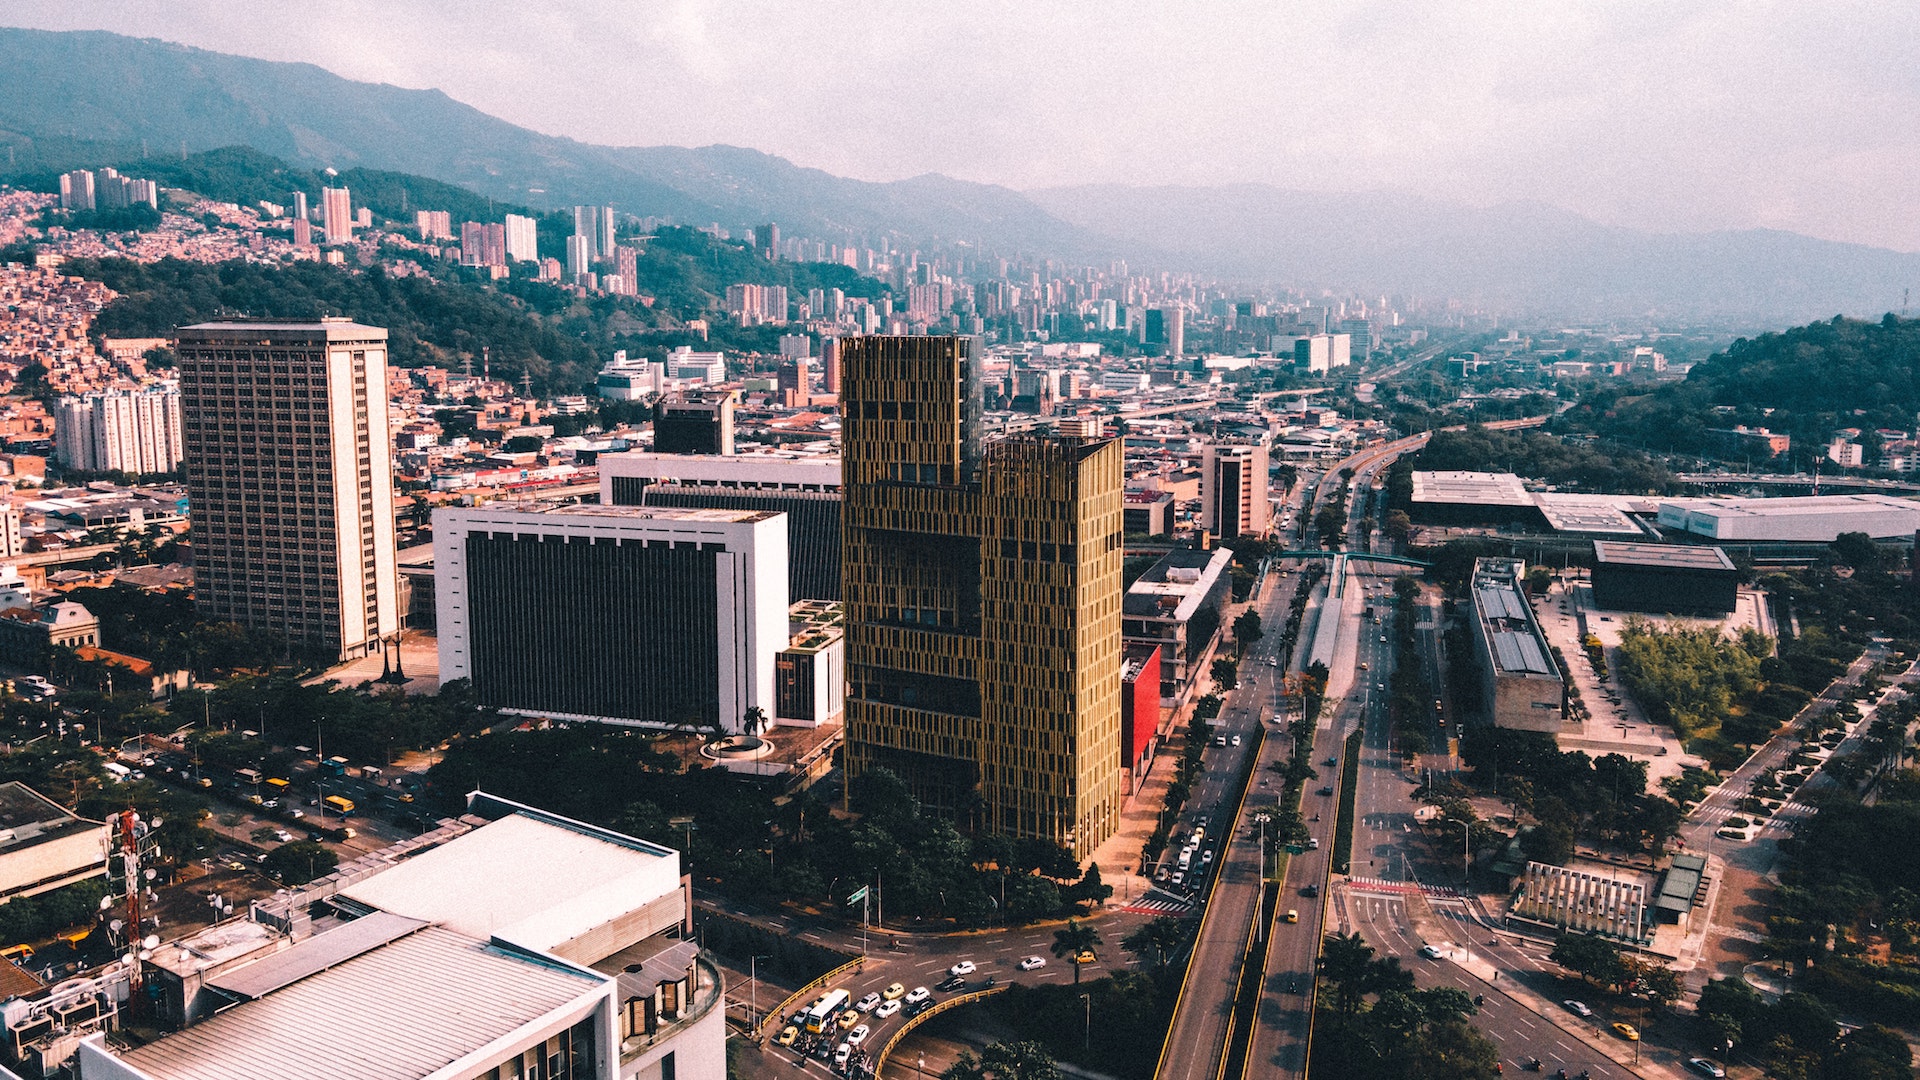 City of Medellin Colombia.